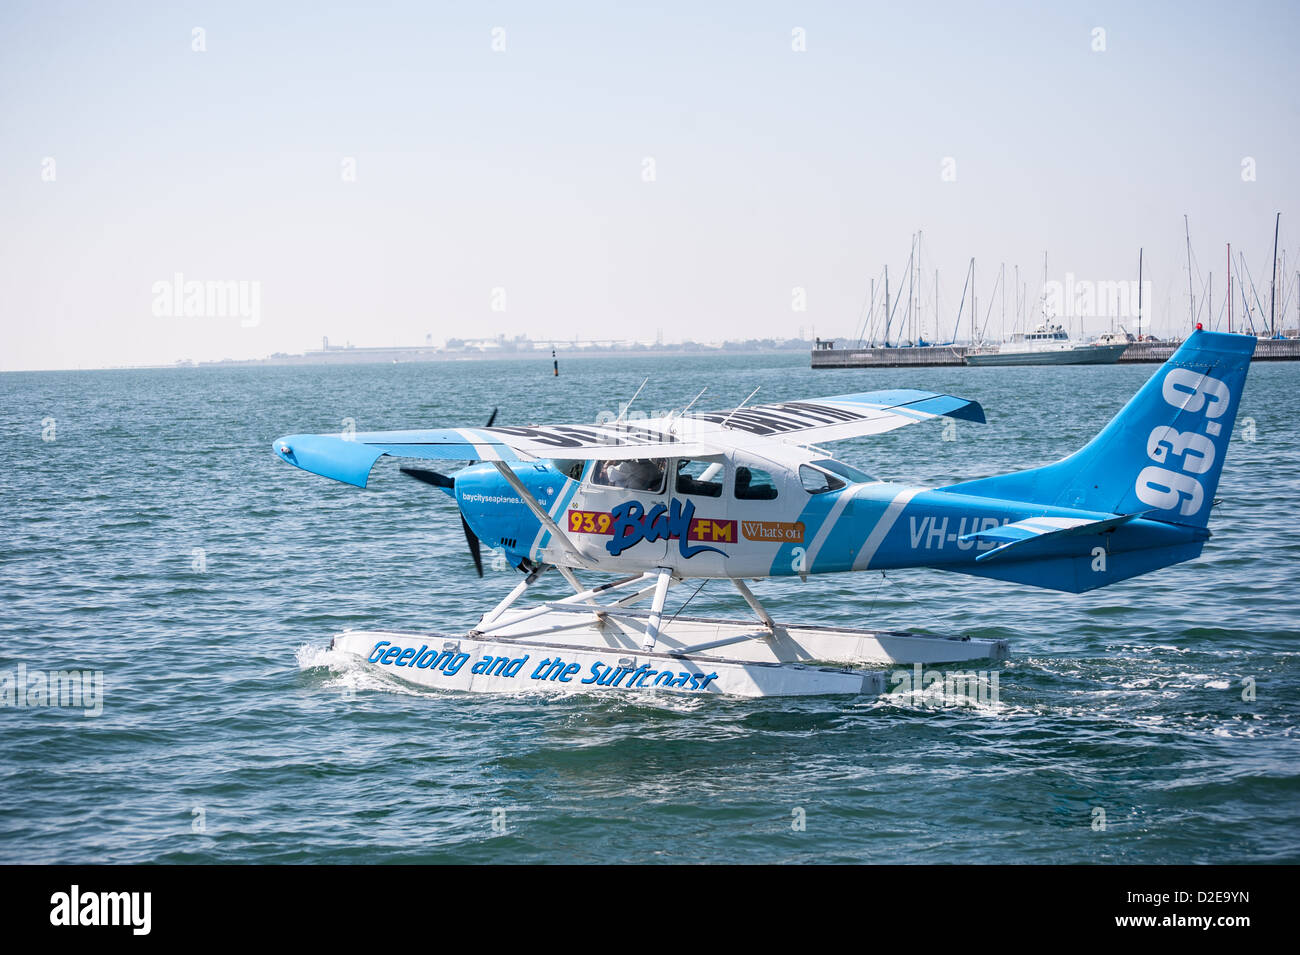 Seaplane at Cunningham Pier Geelong. On January 22 2013 this plane crashed into the sea, injuring 3 passengers on board. Stock Photo